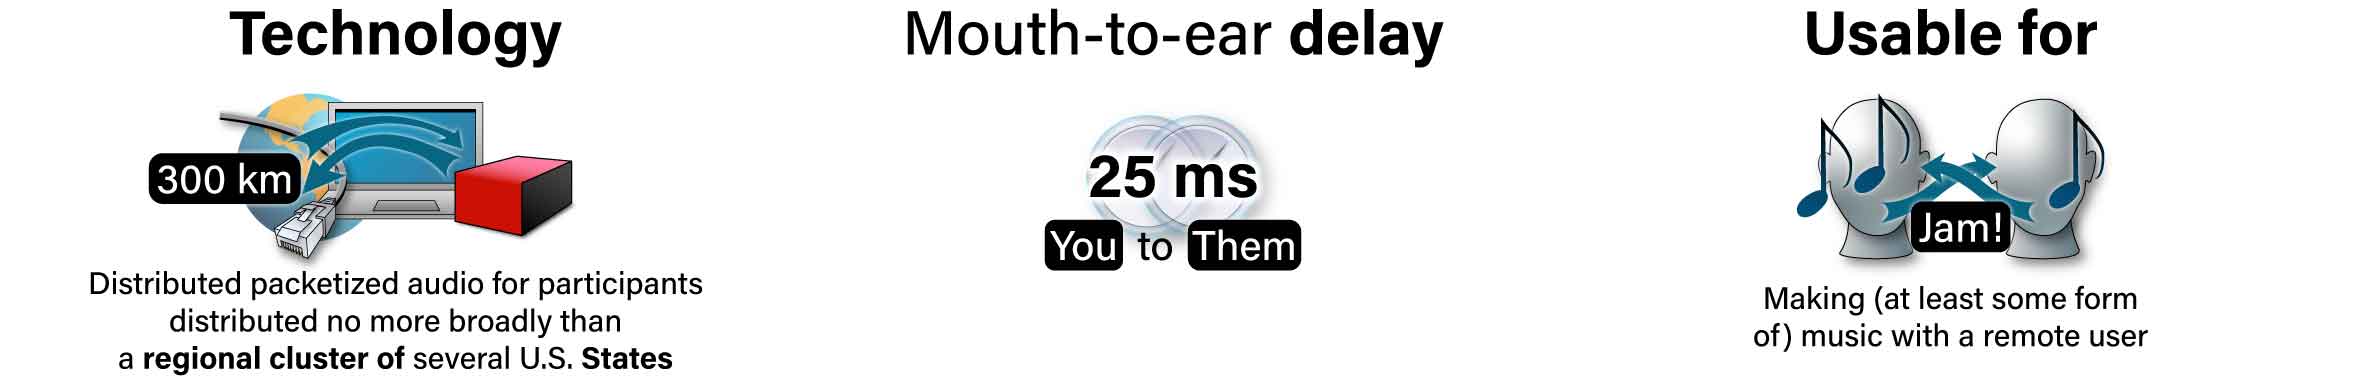 Illustration indicating that transmitting audio over the internet within a geographic region the size of a regional cluster of several U.S. States can achieve 25 milliseconds of delay from your mouth to a remote ear, which is suitable for jamming